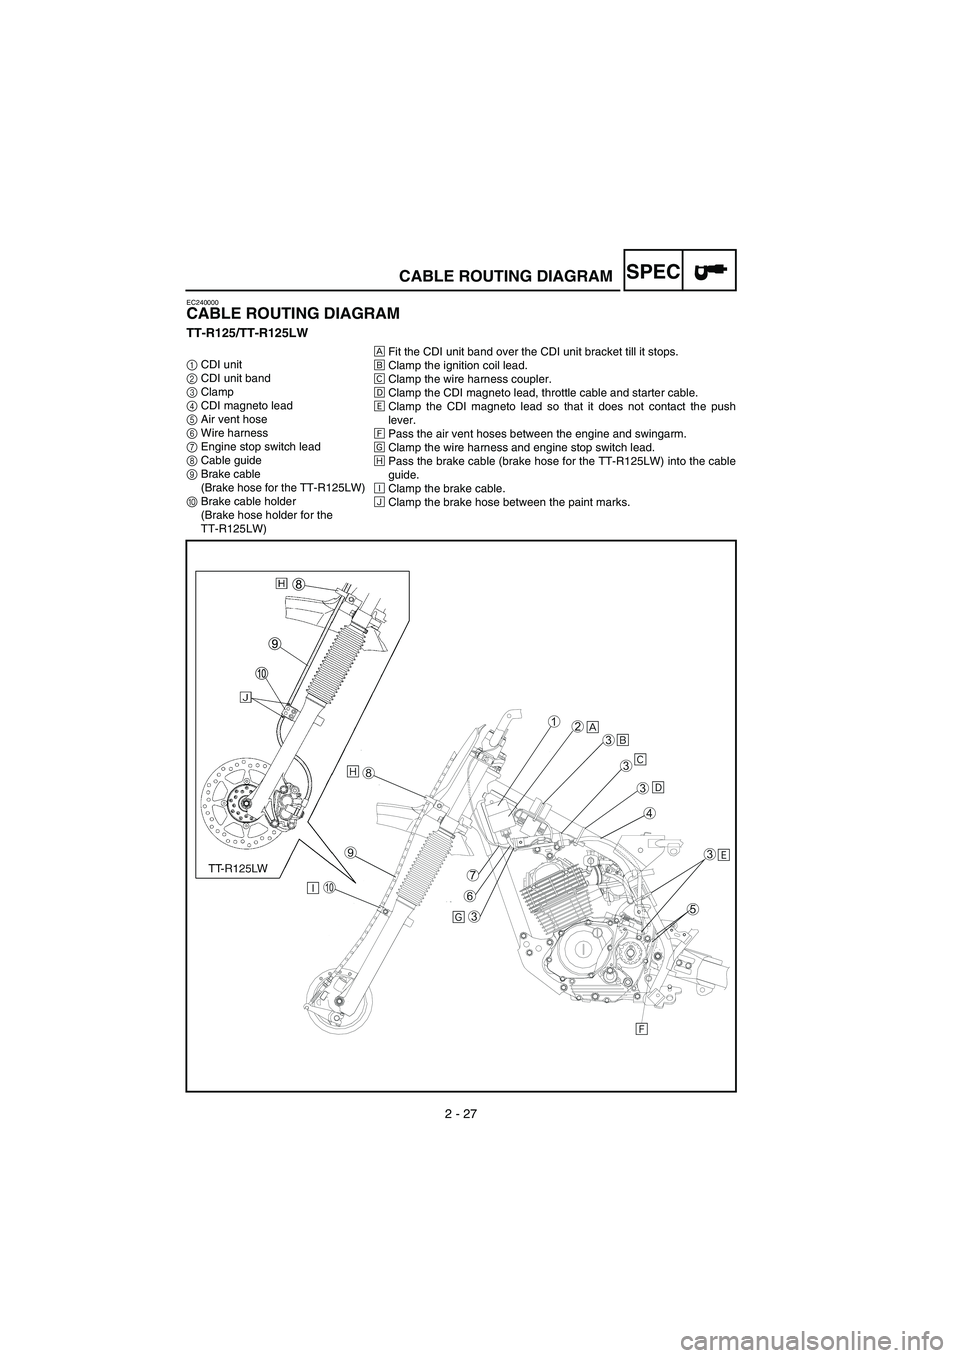 YAMAHA TTR125 2007  Notices Demploi (in French) 152 - A - V
2 - 27
SPEC
EC240000
CABLE ROUTING DIAGRAM
TT-R125/TT-R125LW
1 CDI unit
2  CDI unit band
3  Clamp
4  CDI magneto lead
5  Air vent hose
6  Wire harness
7  Engine stop switch lead
8  Cable g